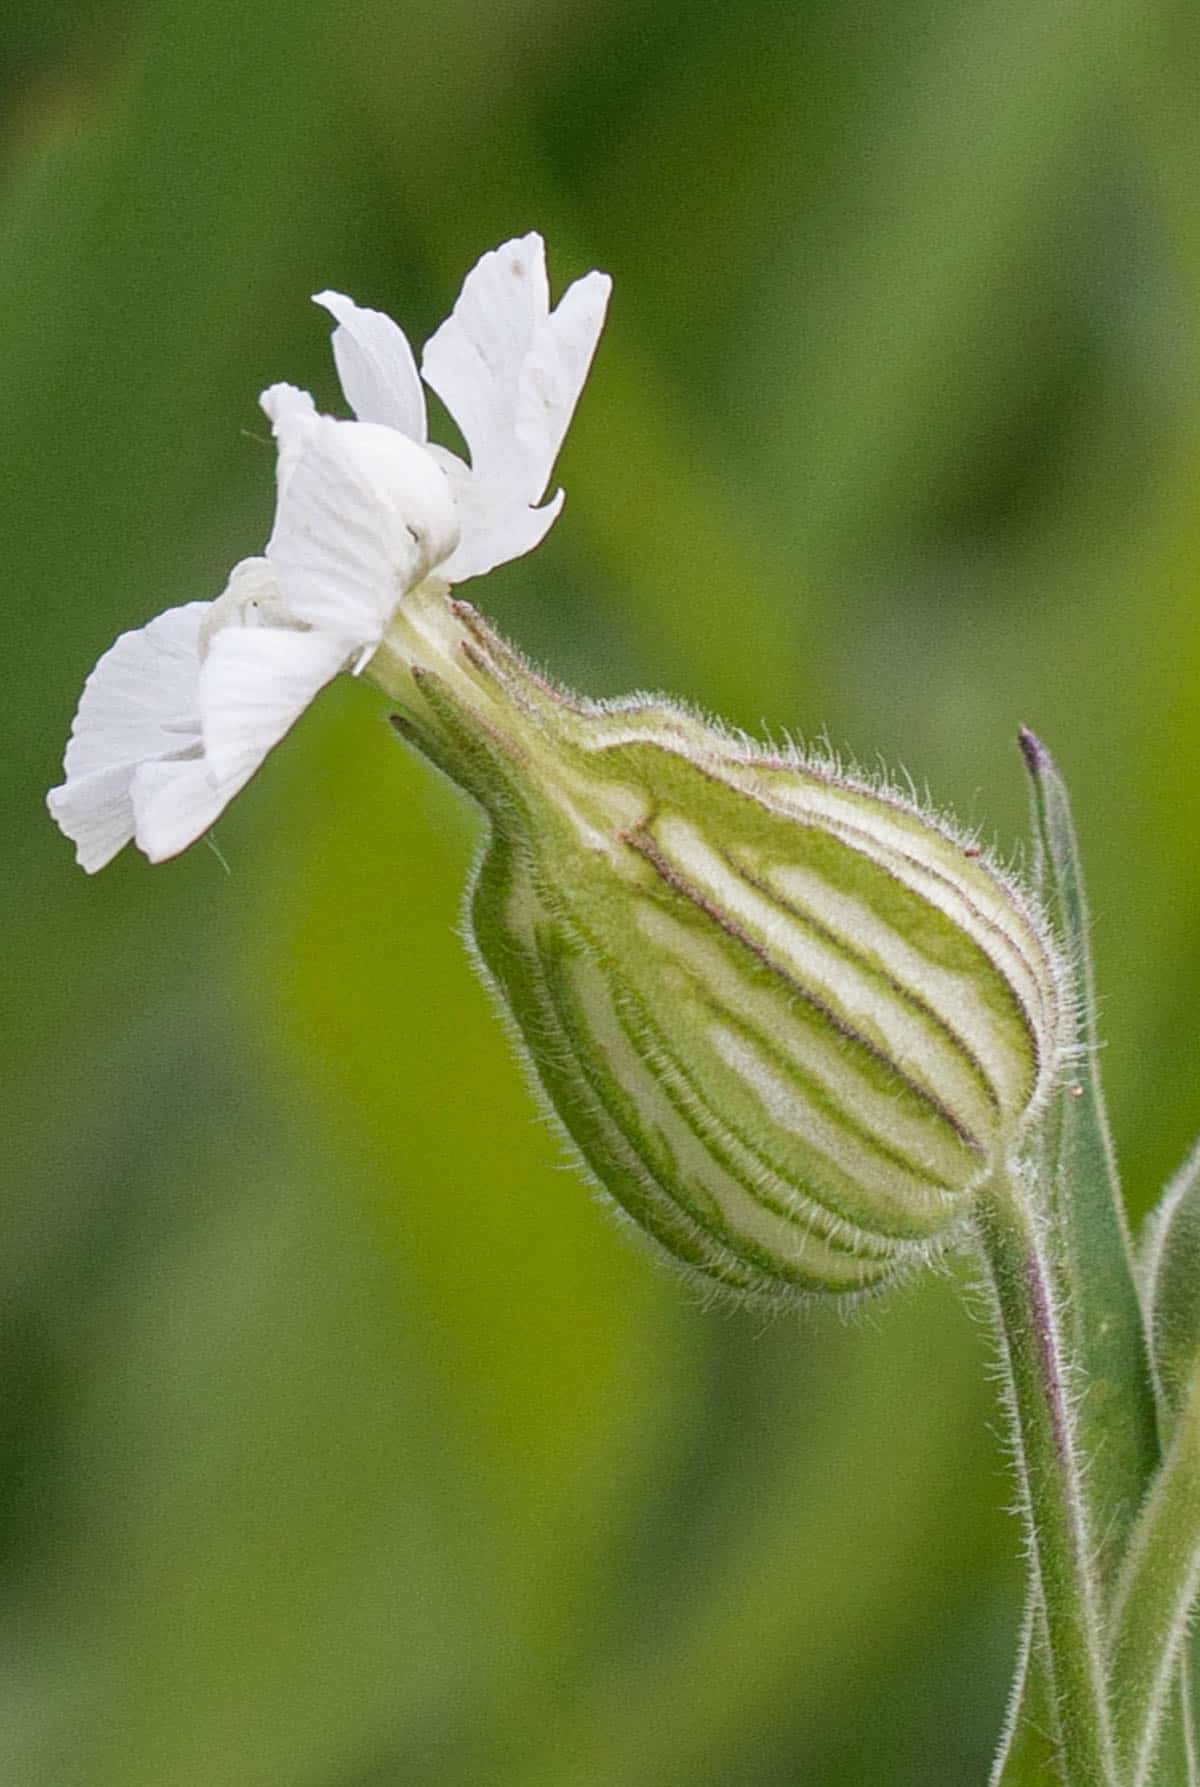 Close up image of female campion flowers showing white petals and veined, bloated calyx. 